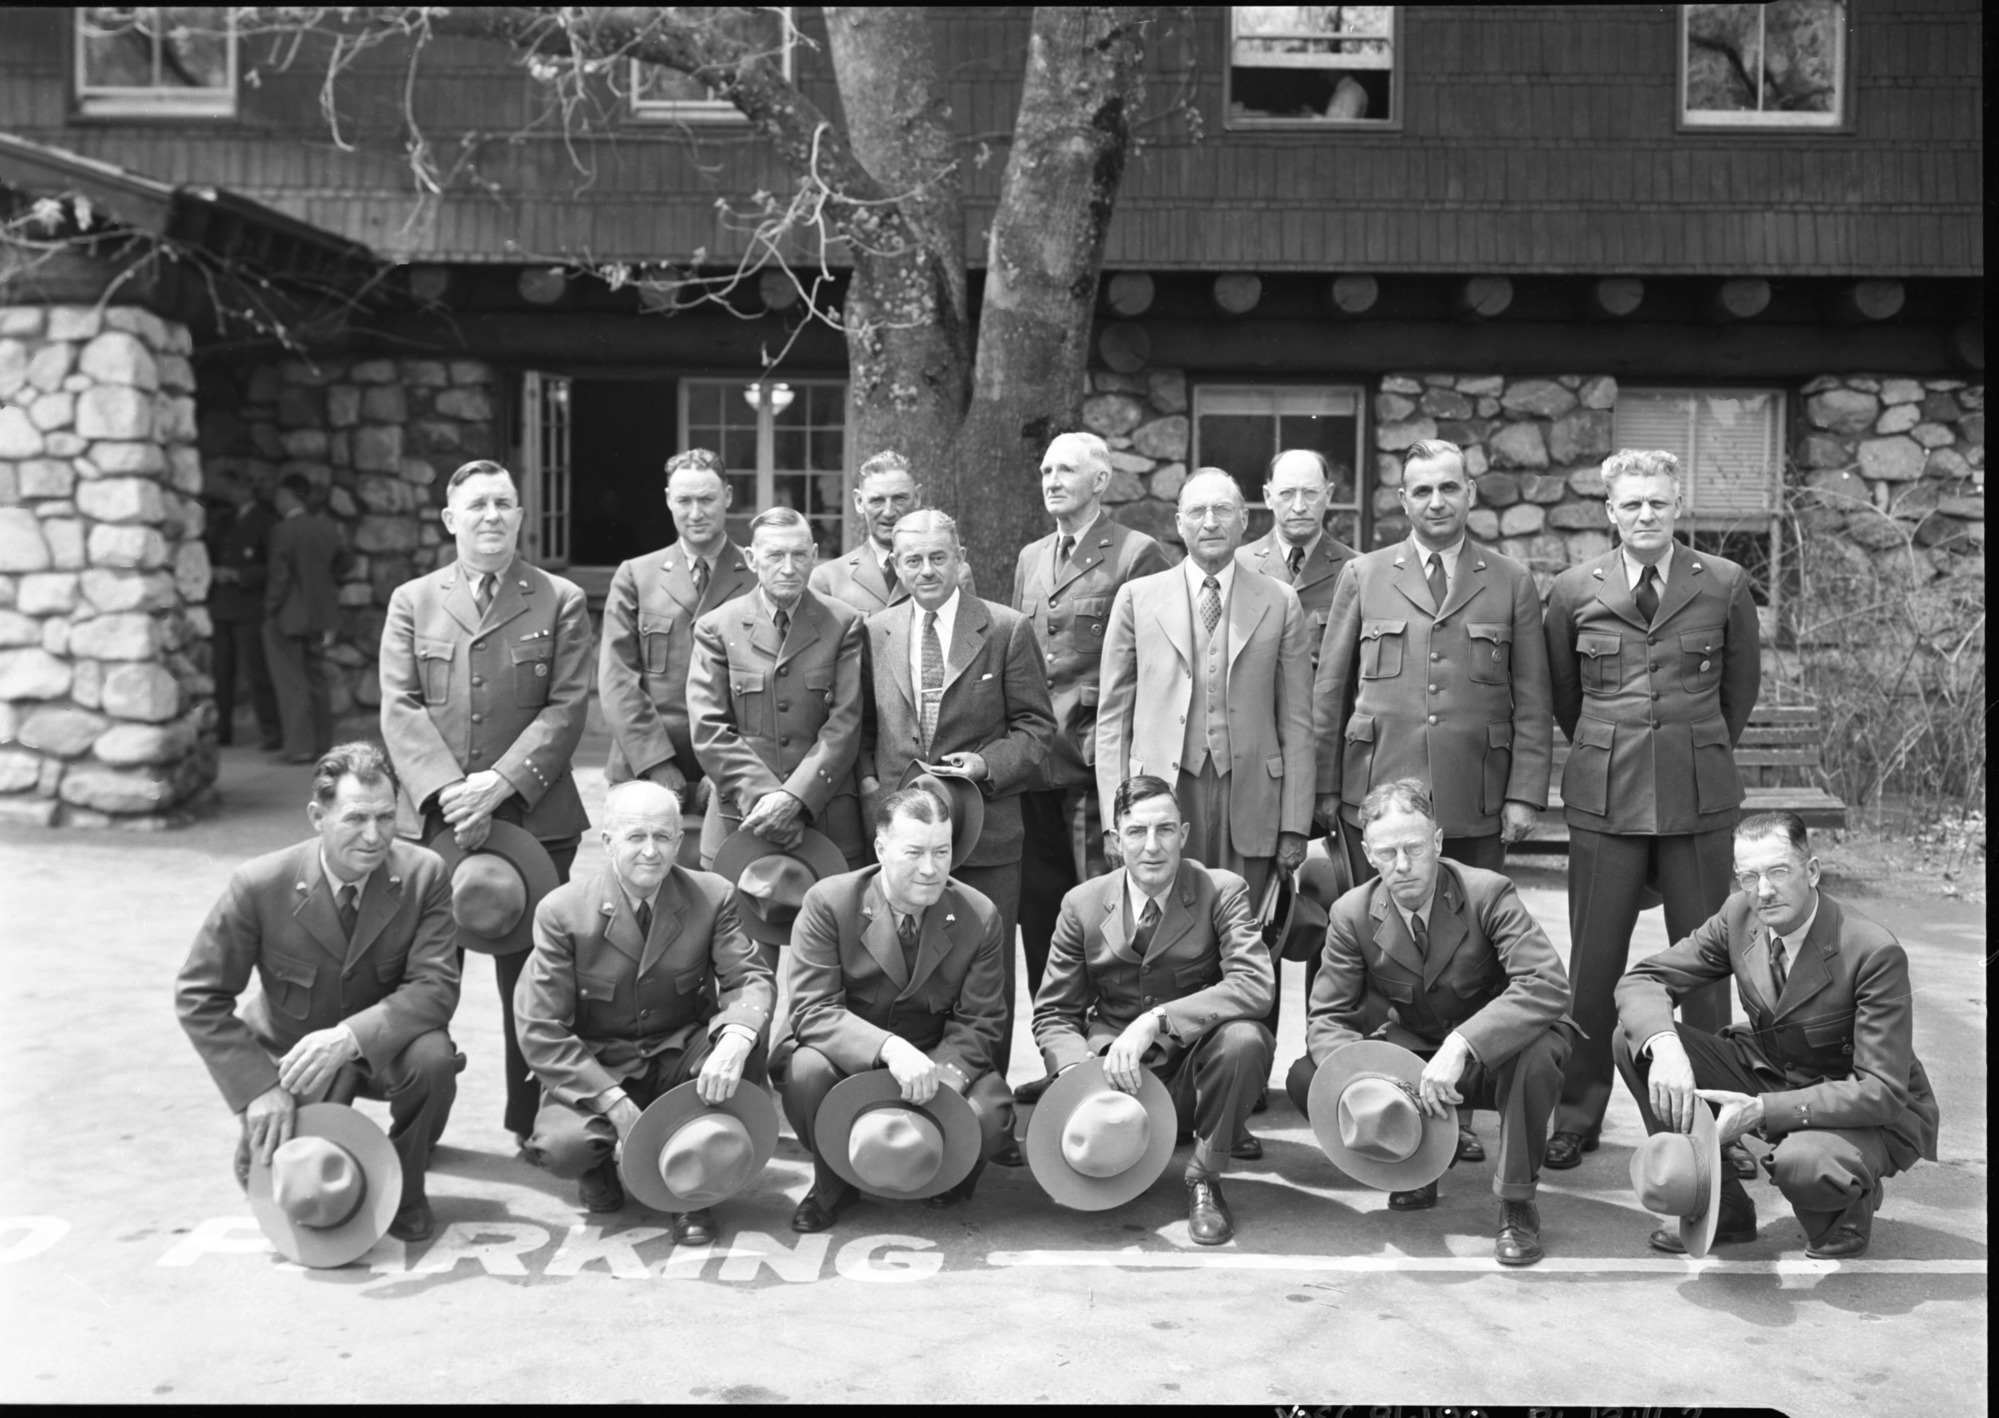 Superintendents and Rangers Fire Conference. With Hats Off. LEFT TO RIGHT Back Row: Finn, Muir Woods; Buckley, Silver Creek R.D.A; Goodwin; Fisher, Lava Beds; Drury; White; Tomlinson; Leavitt; Macy; Preston. Front Row: Pearson; Frank Kittredge; Jimmy Lloyd; Cole; Gibbs, Mendocino Woodlands; McCarthy, Craters of the Moon